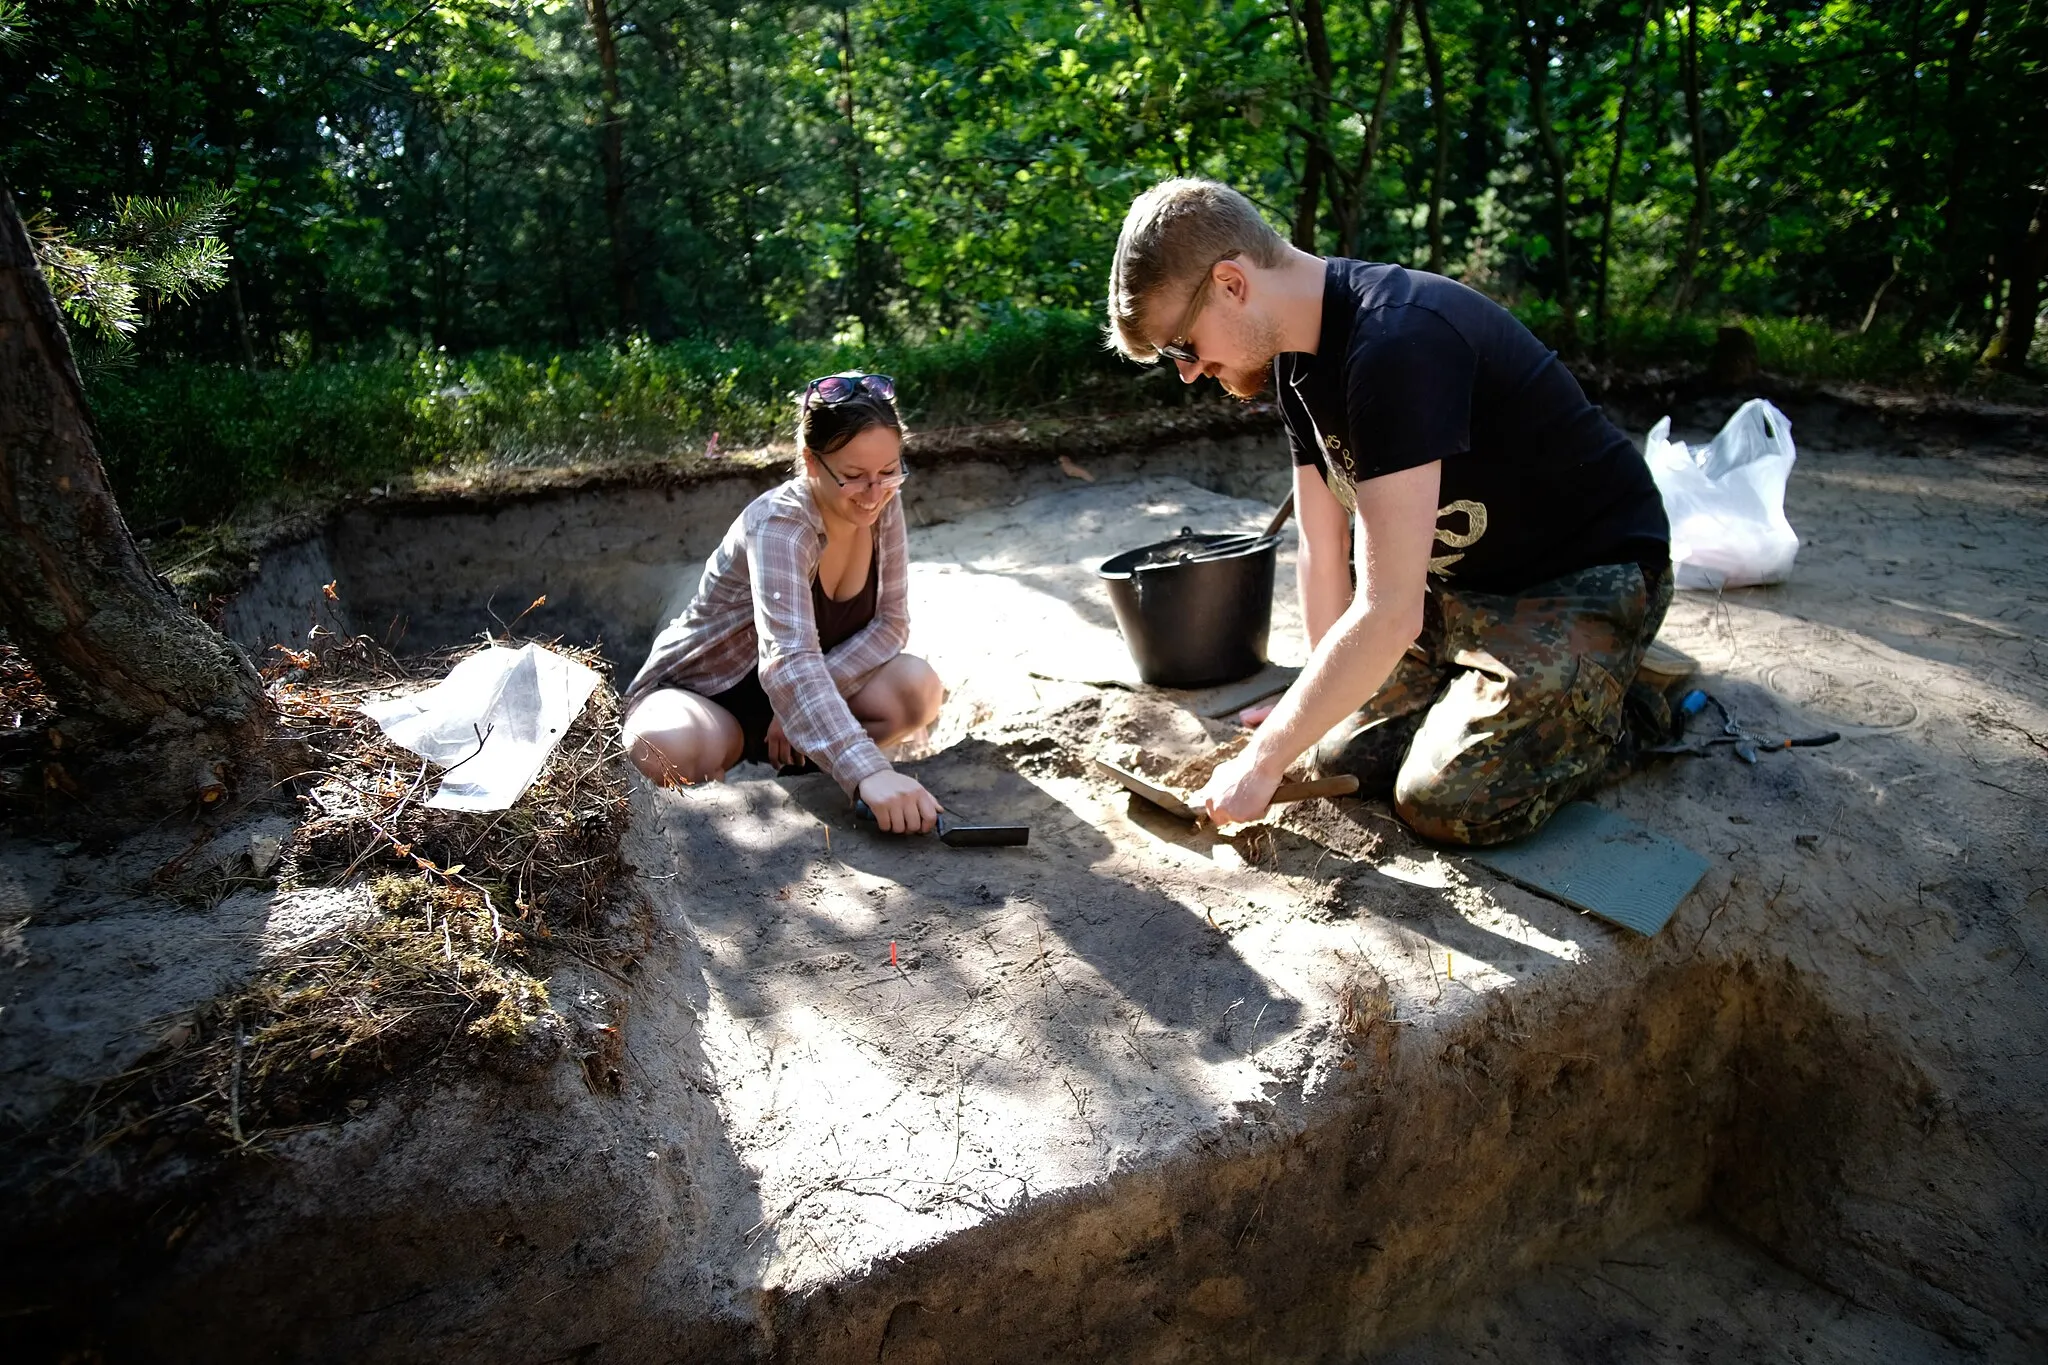 Photo showing: Archaeologist from Chodlik Archaeological Mission of the Institute of Archaeology and Ethnology Polish Academy of Sciences exploring early medieval cremation burials in Chodlik - small village located in Eastern Poland famous from rich relics of early medieval settlements.